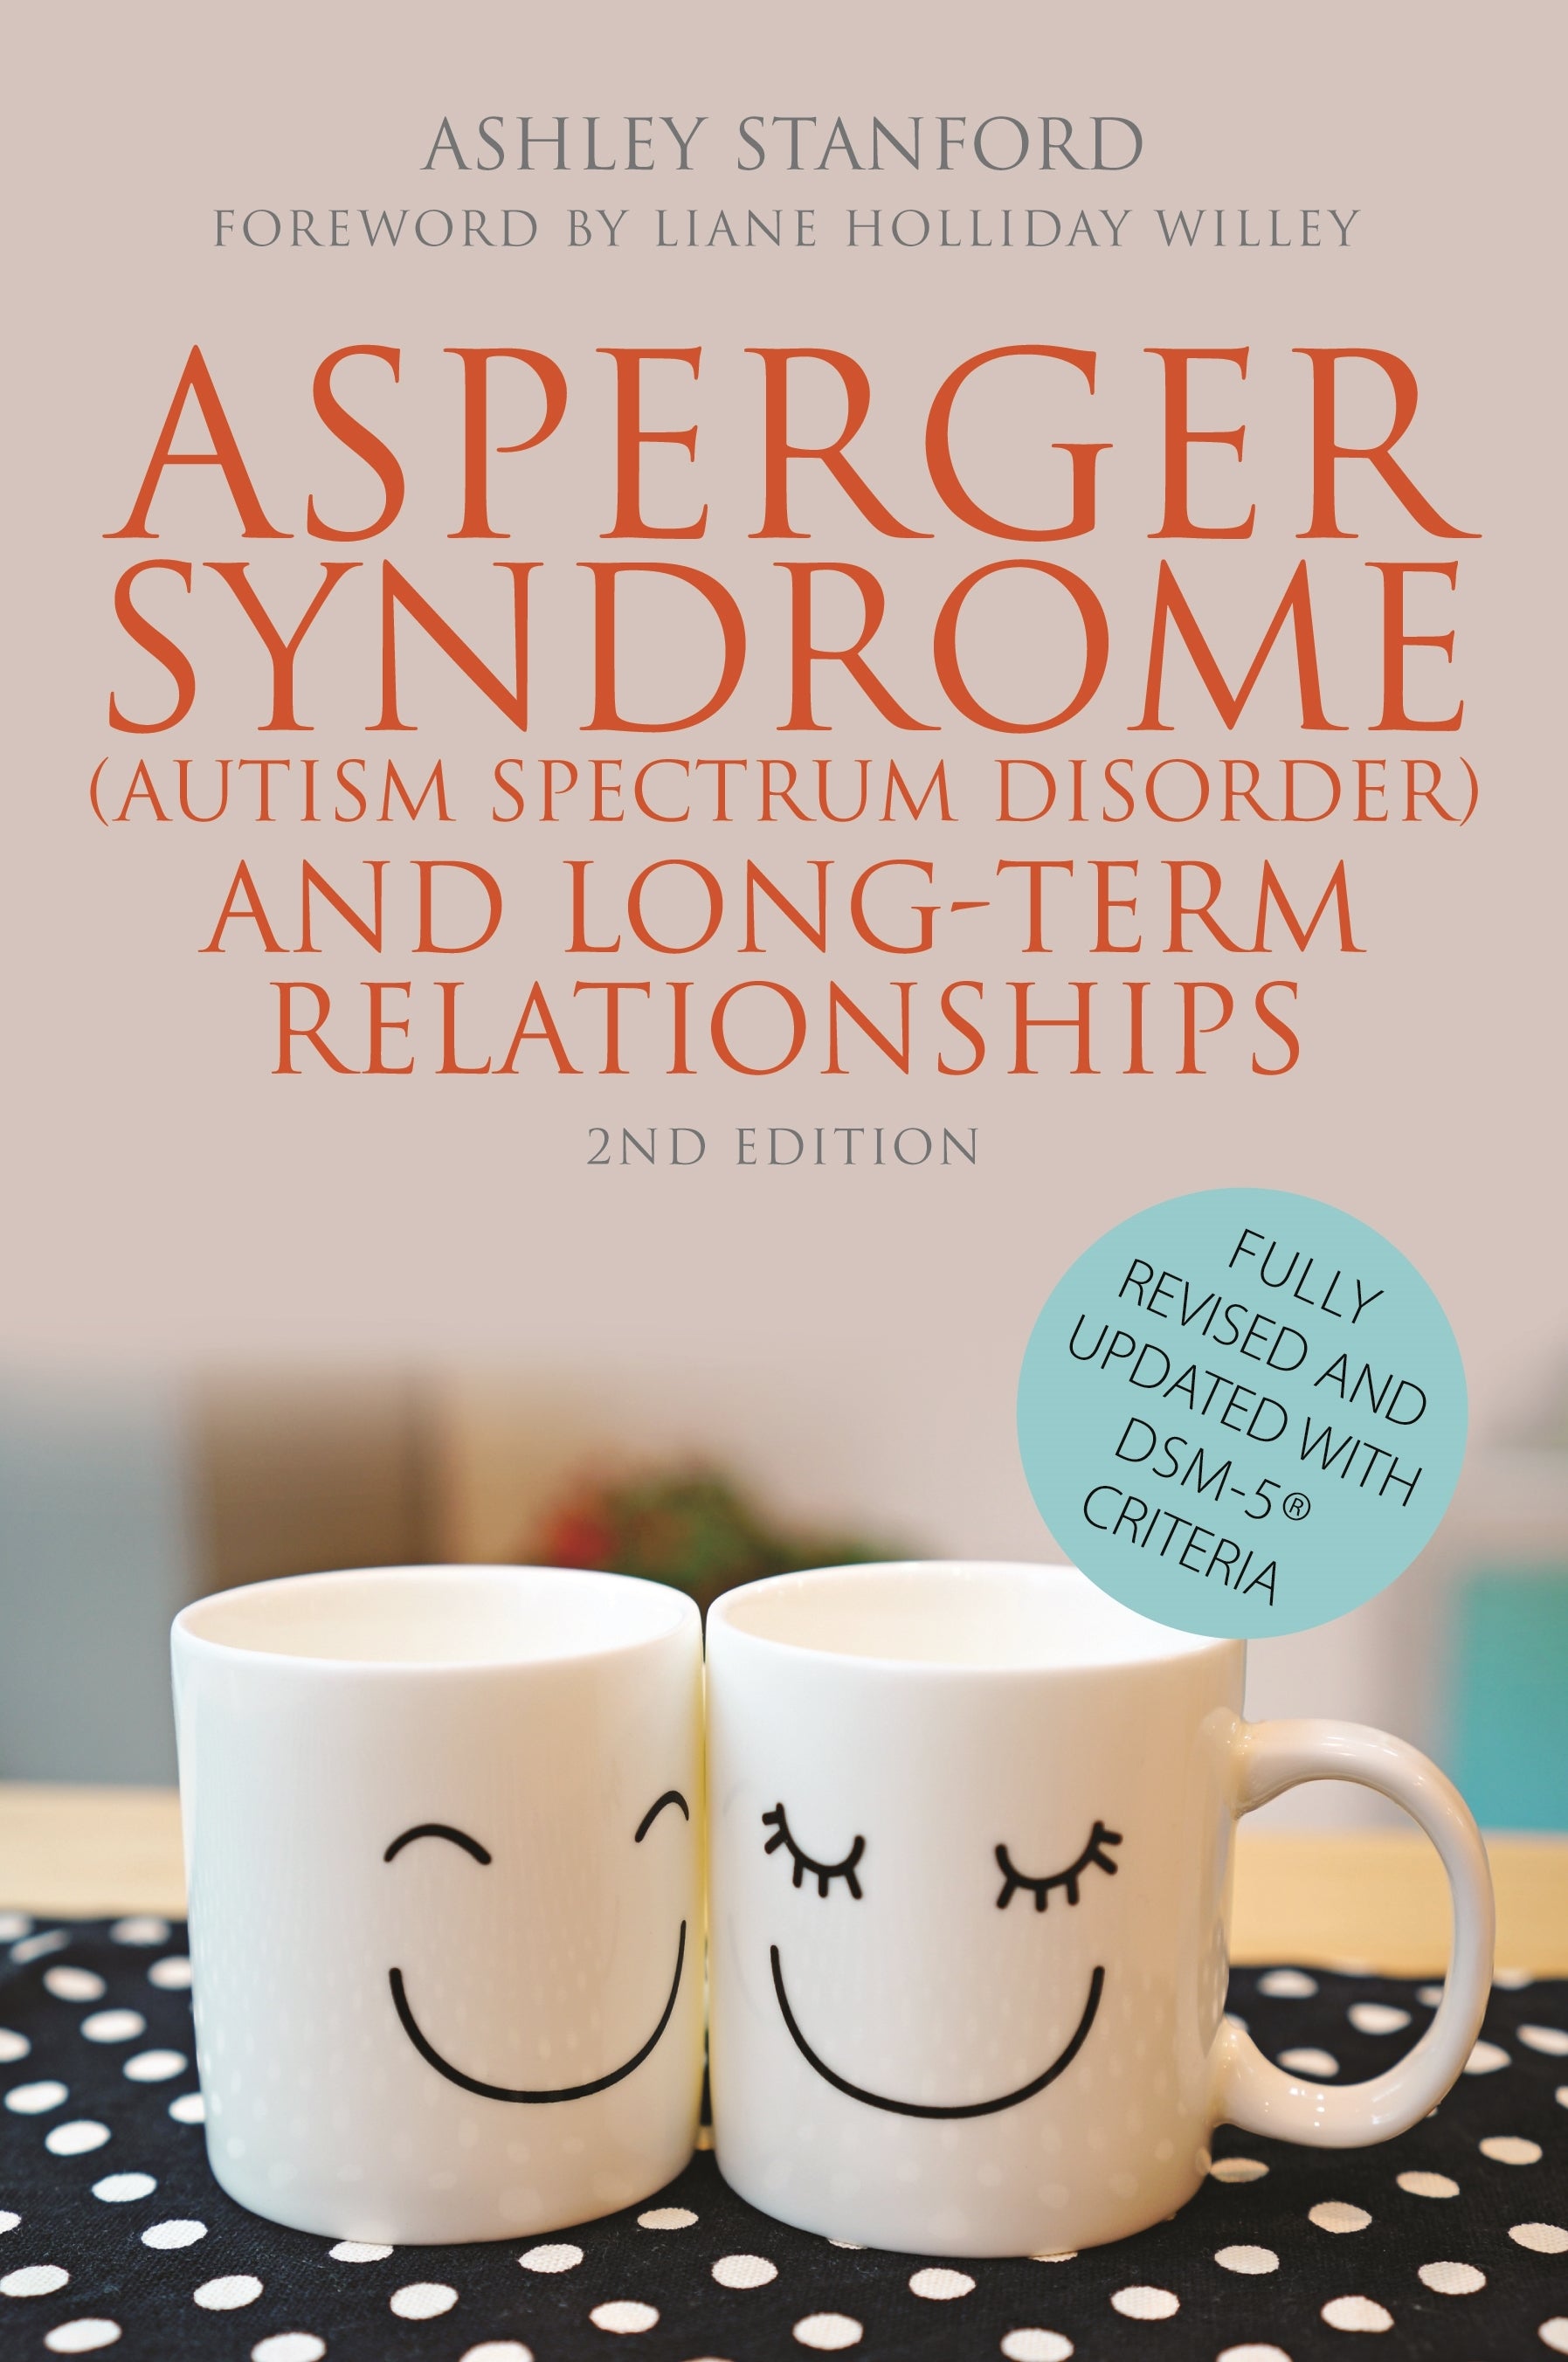 Asperger Syndrome (Autism Spectrum Disorder) and Long-Term Relationships by Ashley Stanford, Liane Holliday Willey